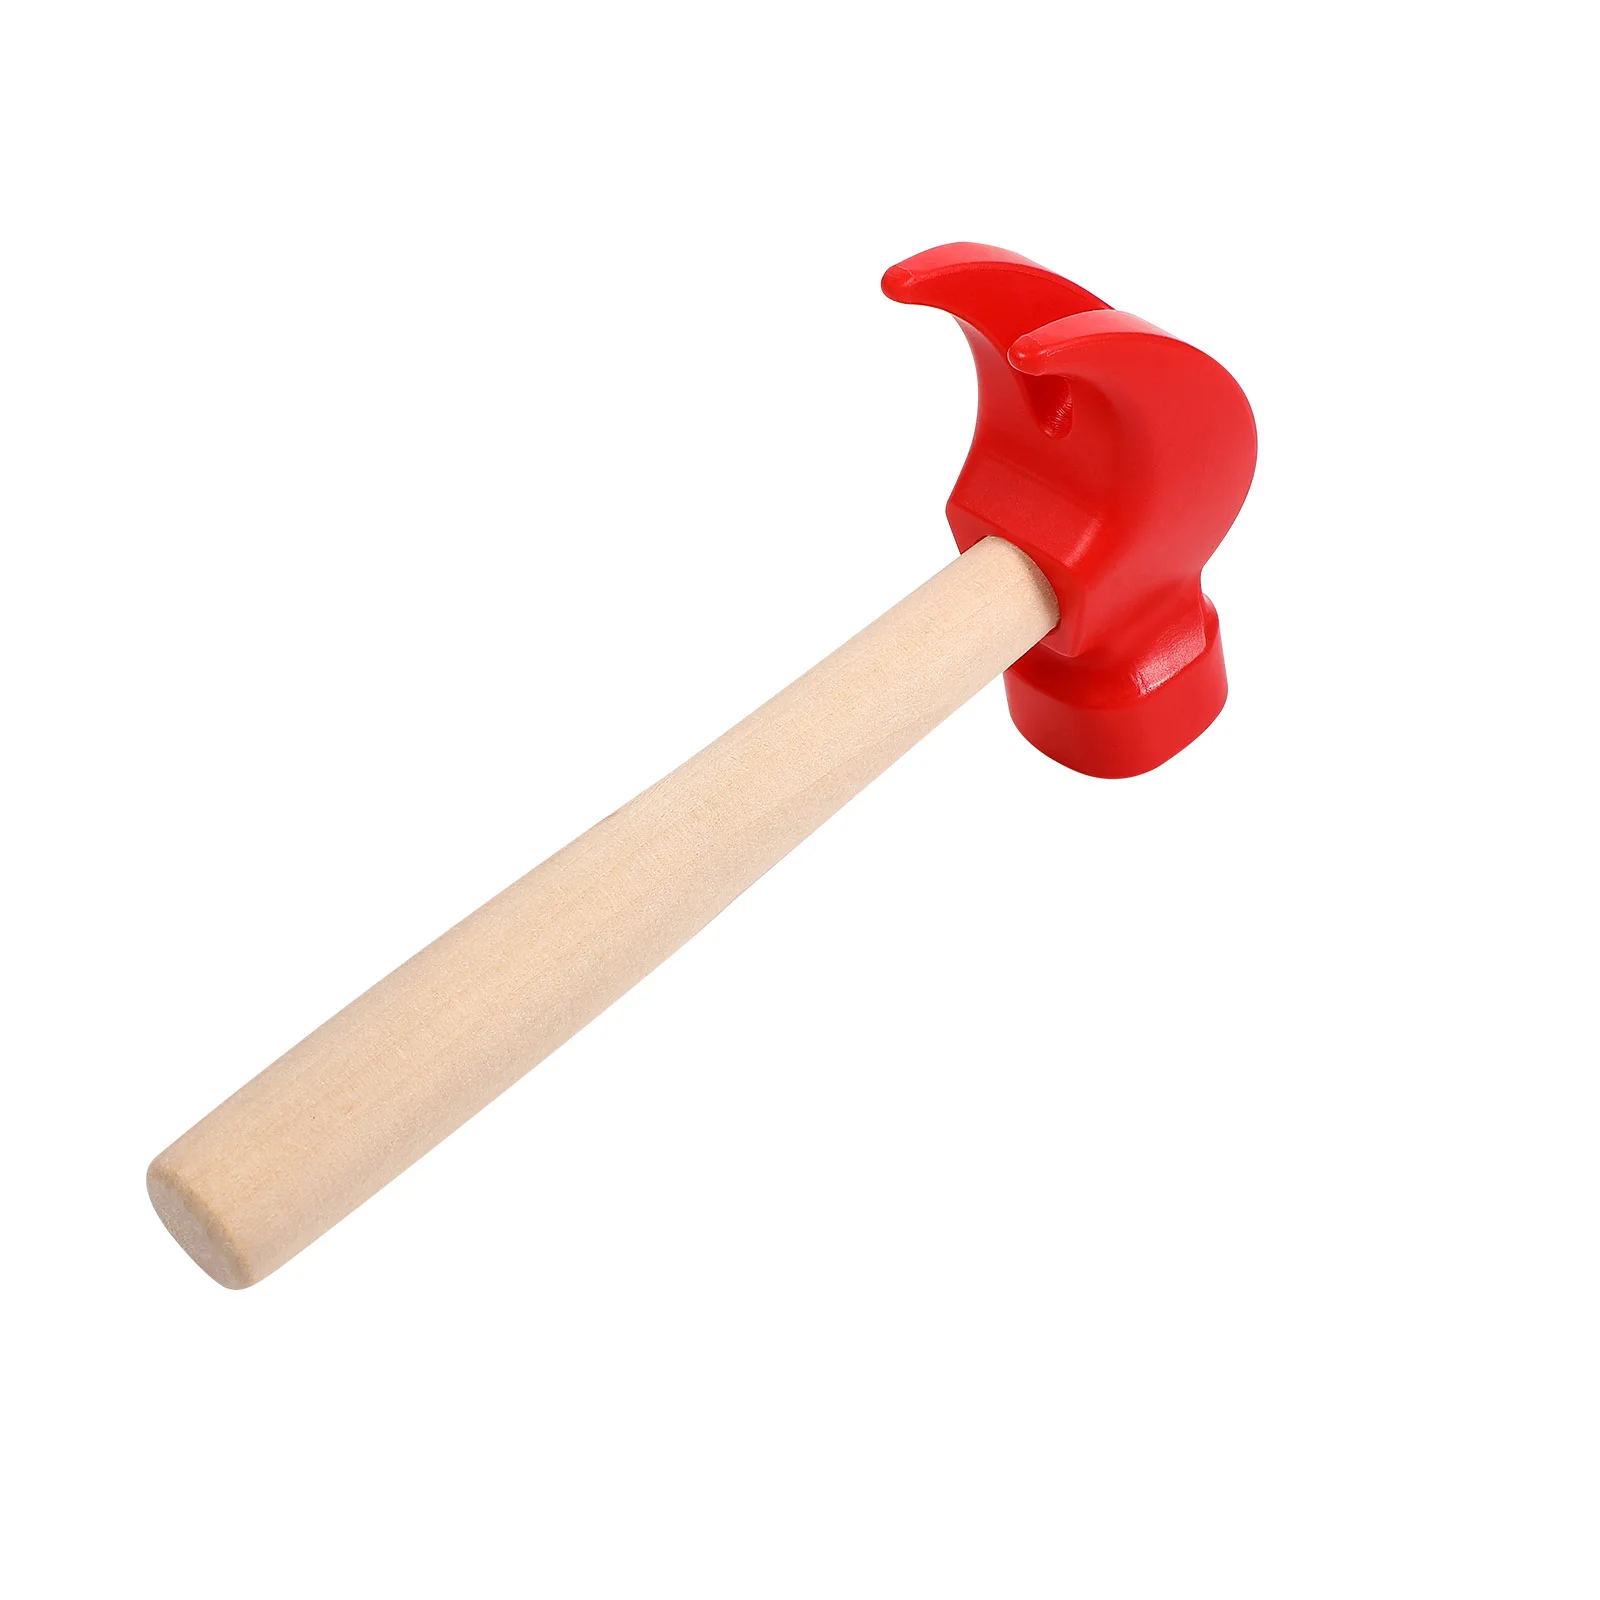 

Small Wooden Hammer Simulated Toddler Kids Educational Toys Baby 6 12 Months Tool Children Tools